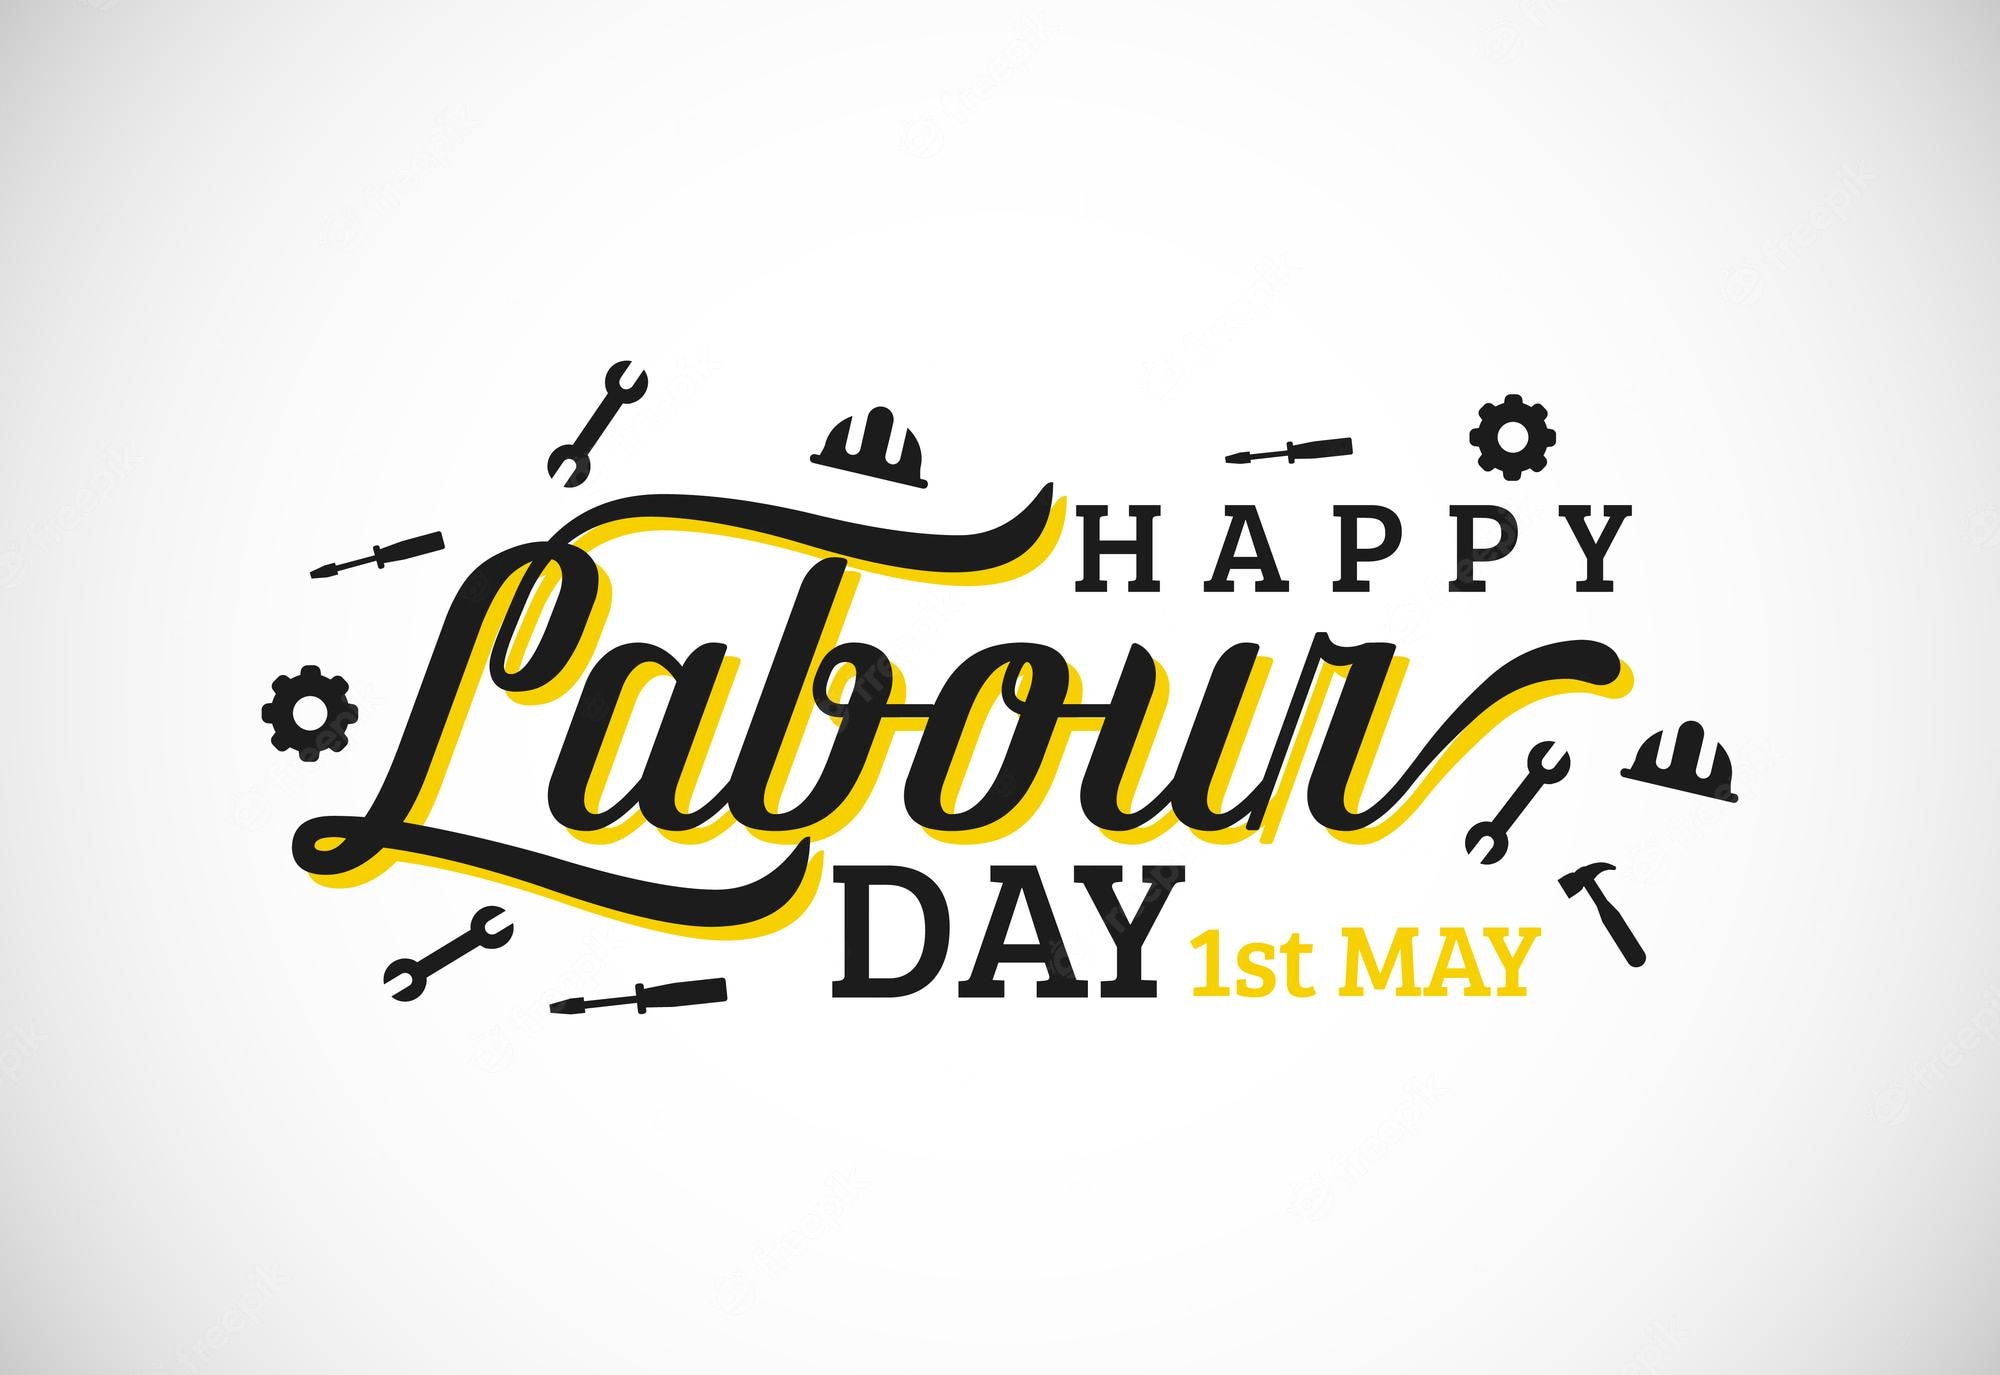 Labor Day 2022 Wallpapers Wallpaper Cave